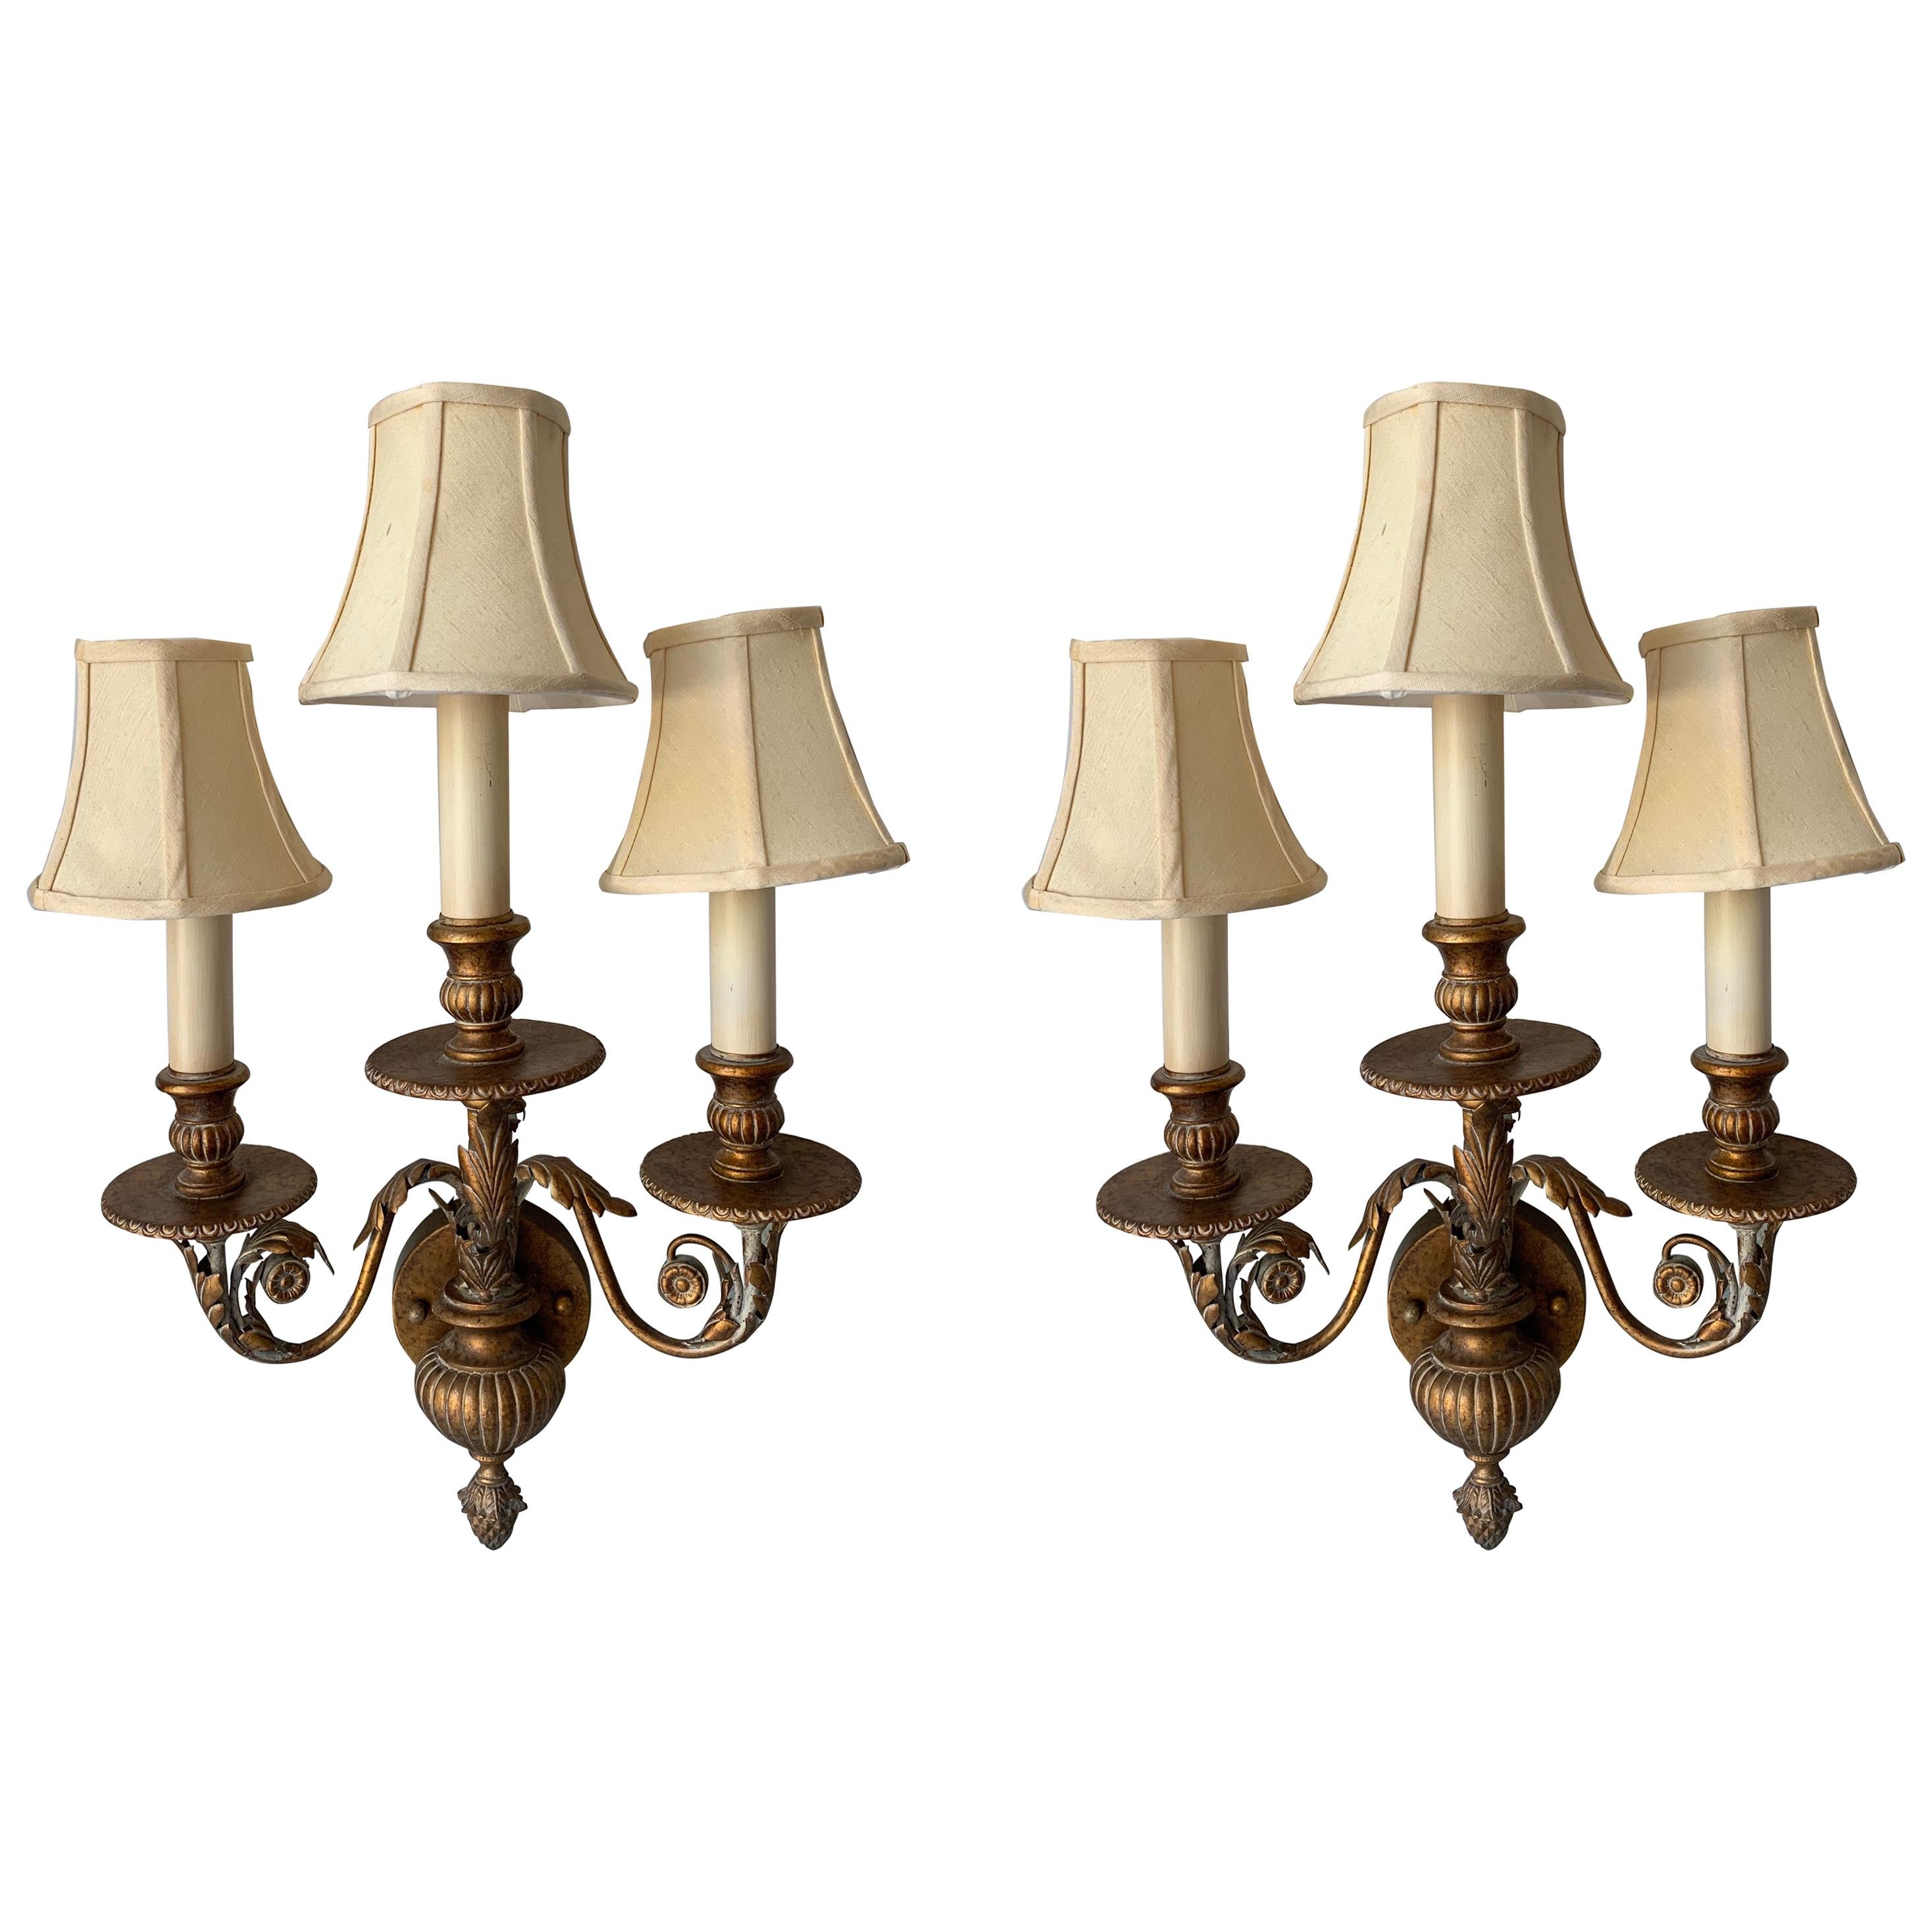 the Fine Arts Company 3-Arm Brass Sconces & Shades - a Pair For Sale